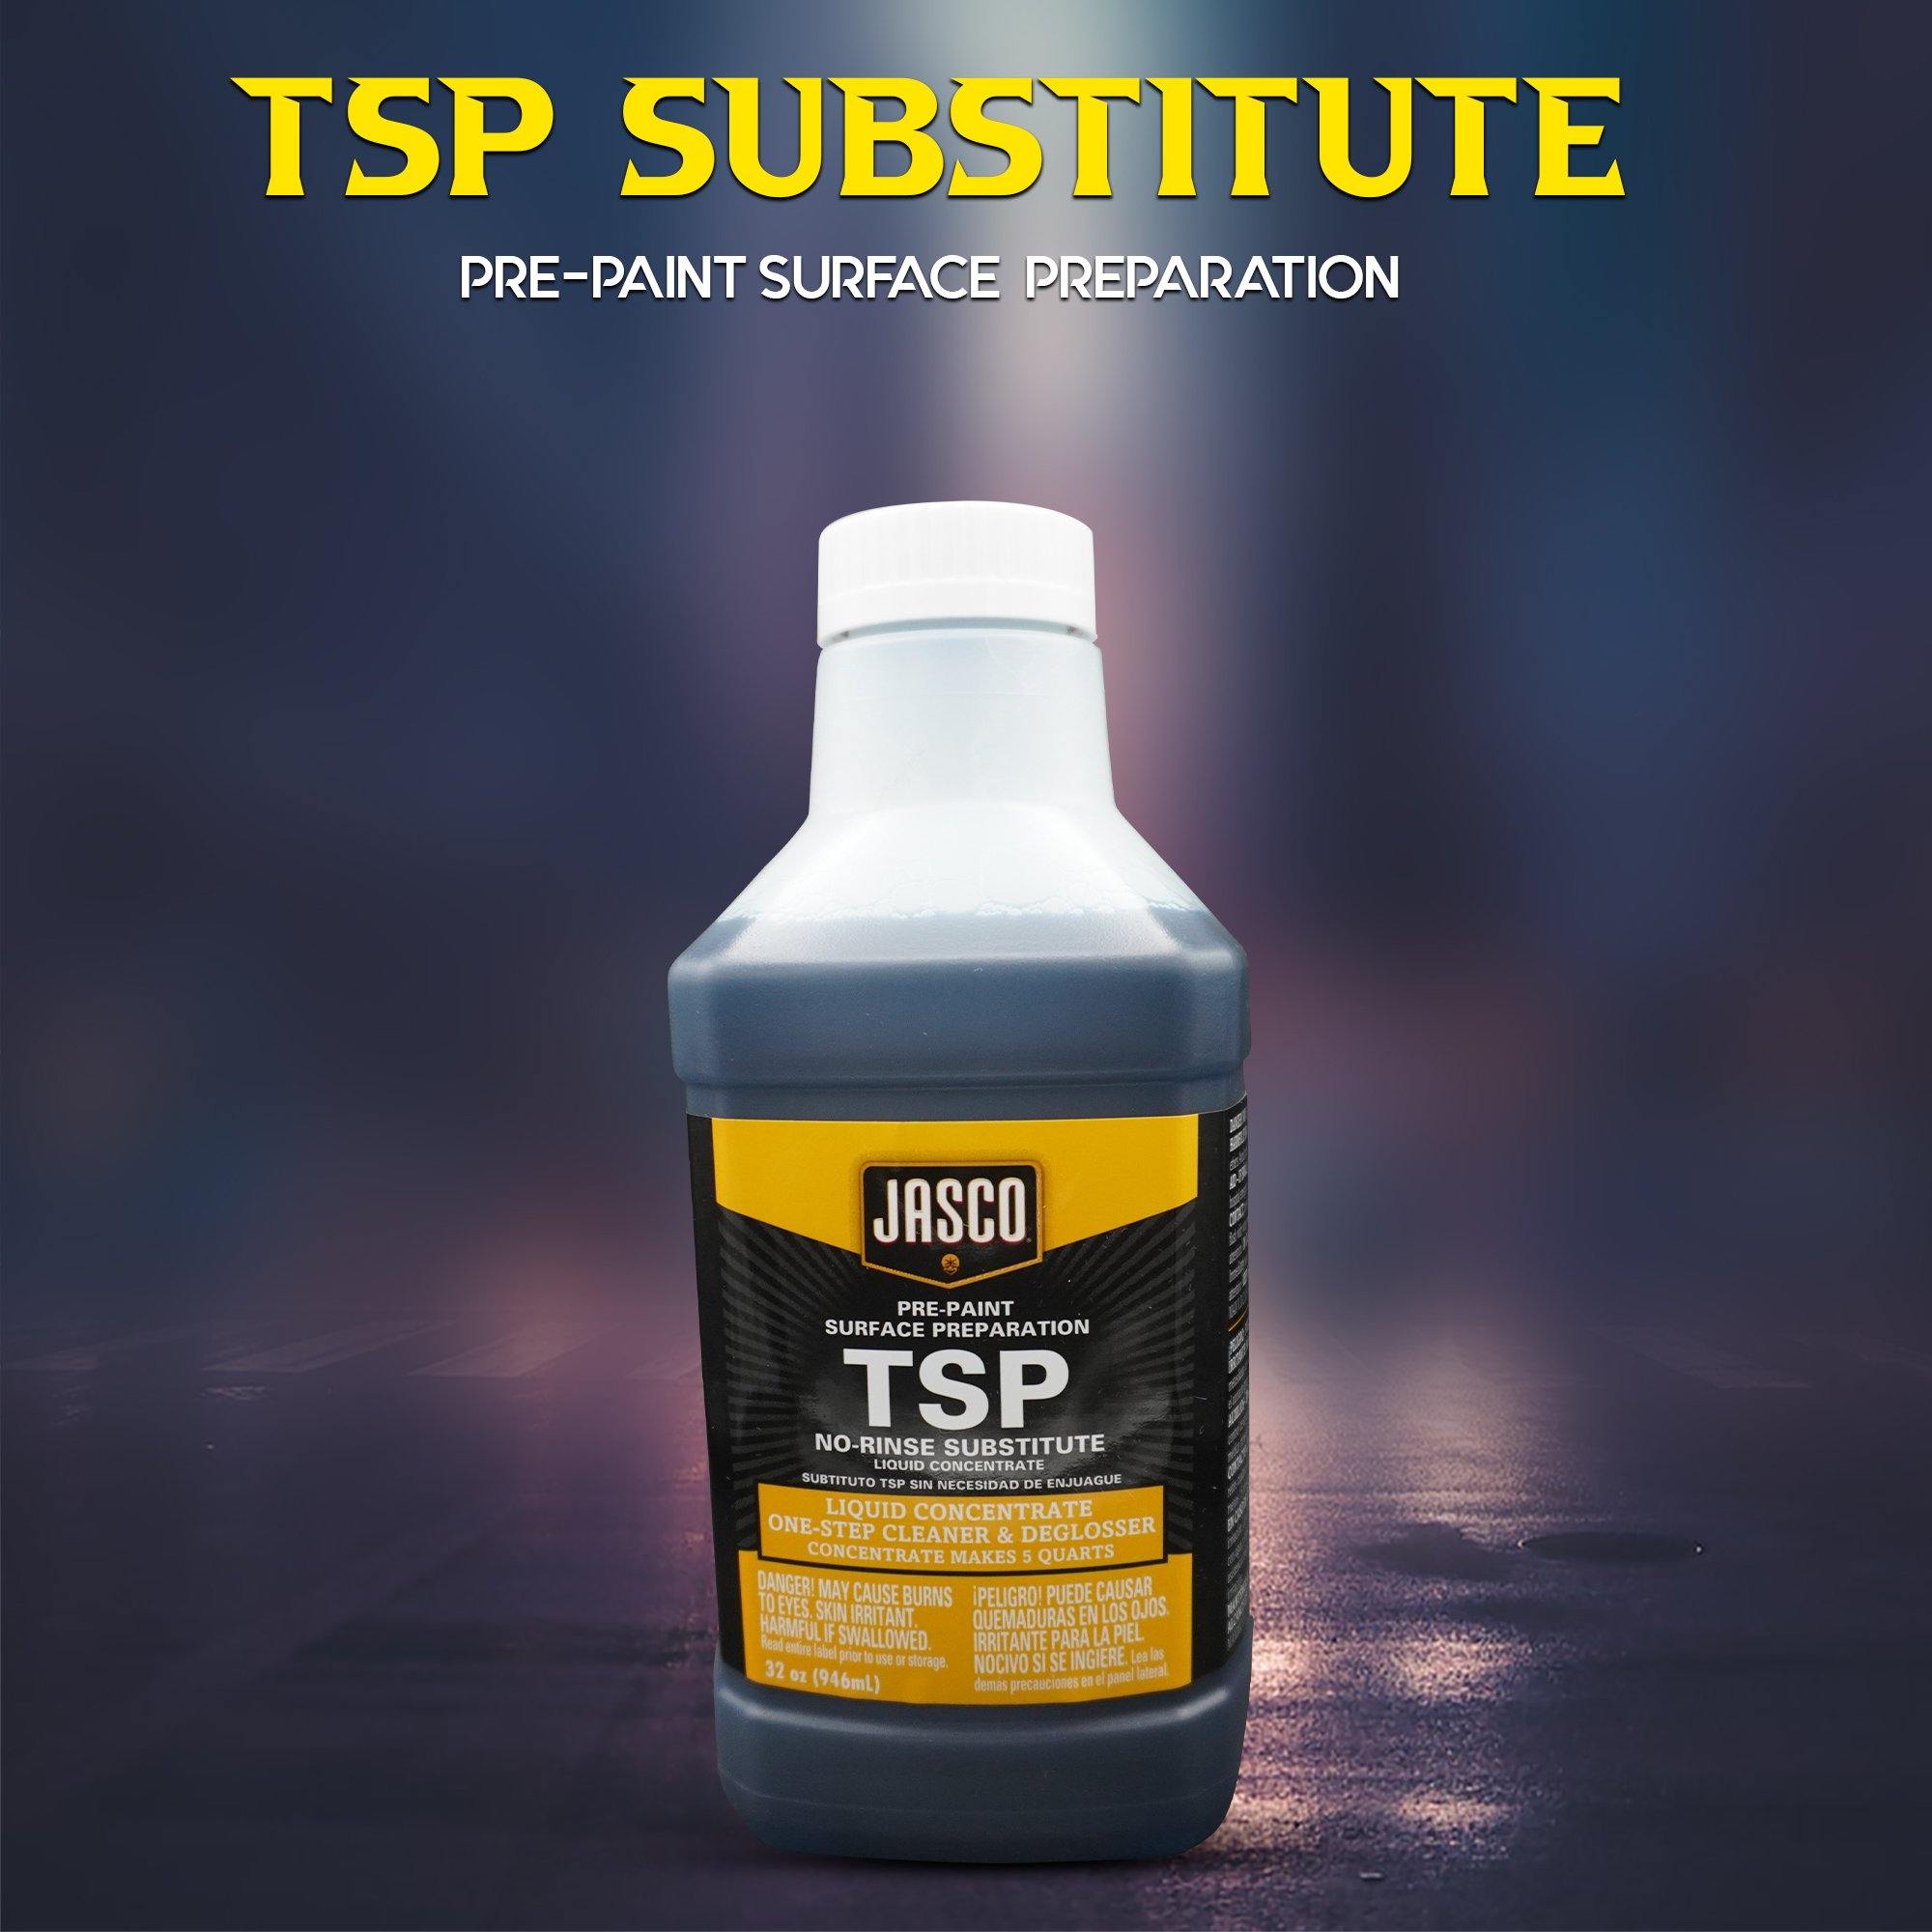 JASCO TSP Substitute Solutions Tri-Sodium Phosphate Extremely Strong and Effective All-Purpose Cleaner Heavy-Duty Degreasing and Deglossing Plus Centaurus AZ Gloves, 1 Quart Concentrated - CENTAURUS AZ